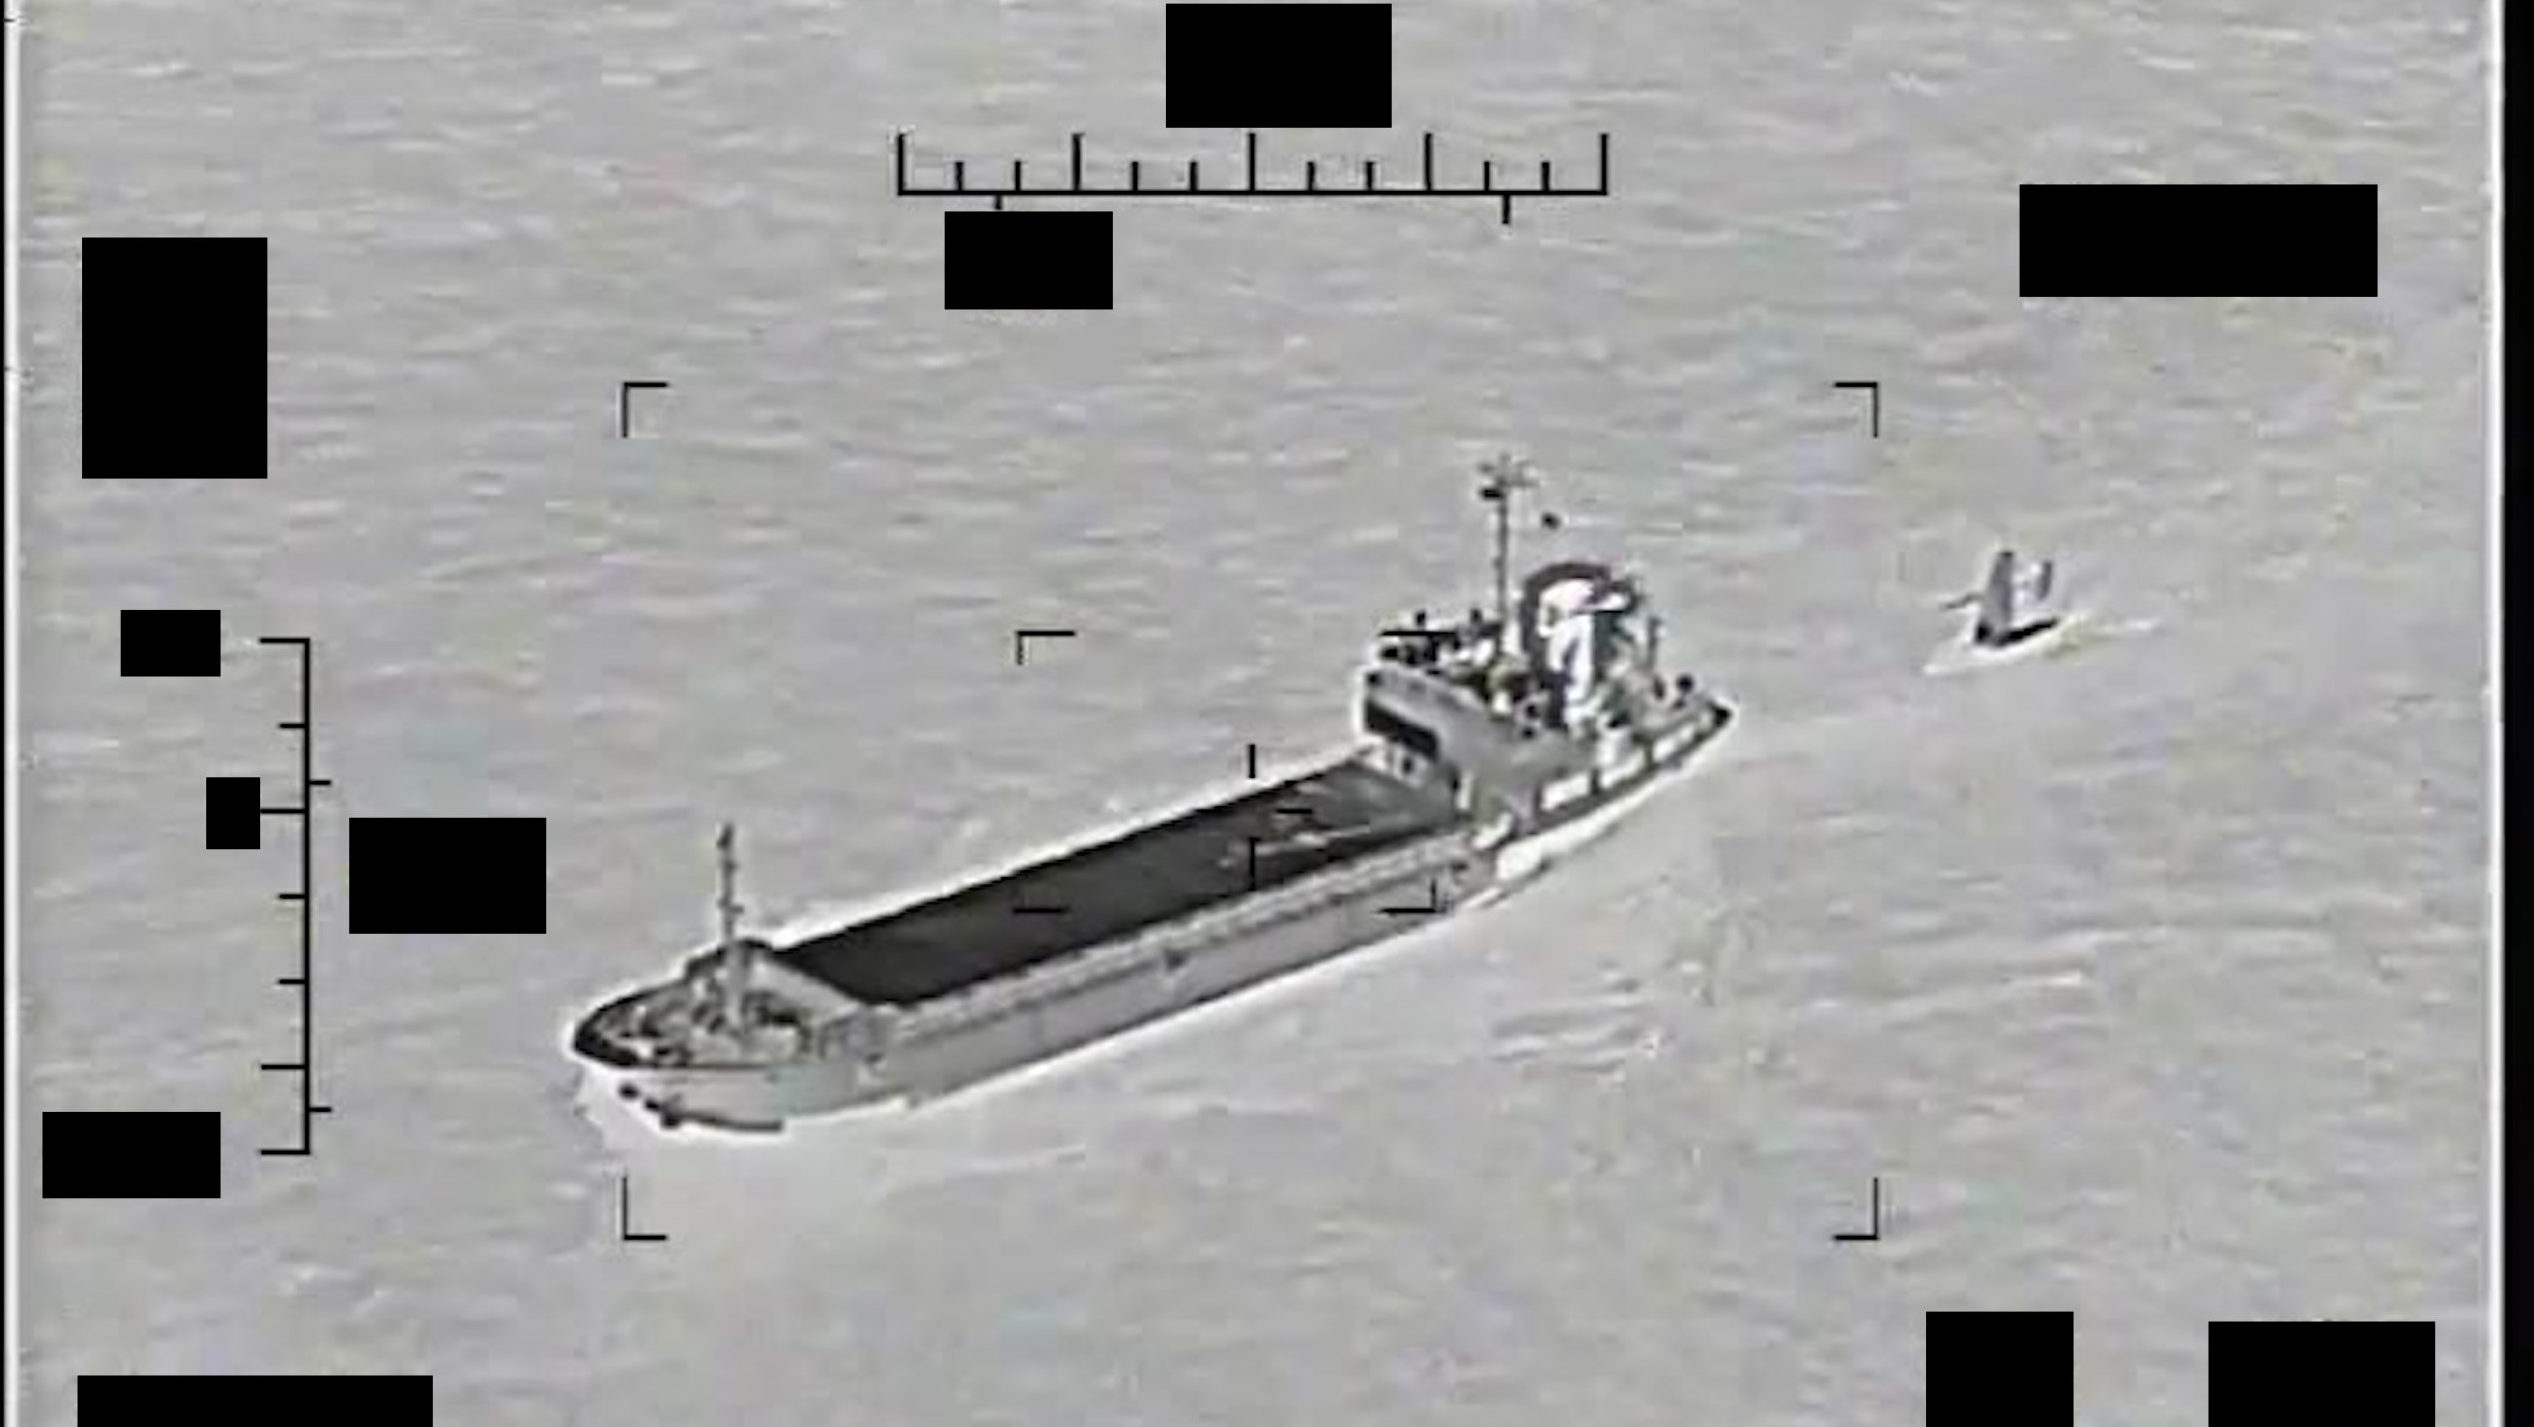 Iran Seizes, Then Releases US Research Vessel in Persian Gulf